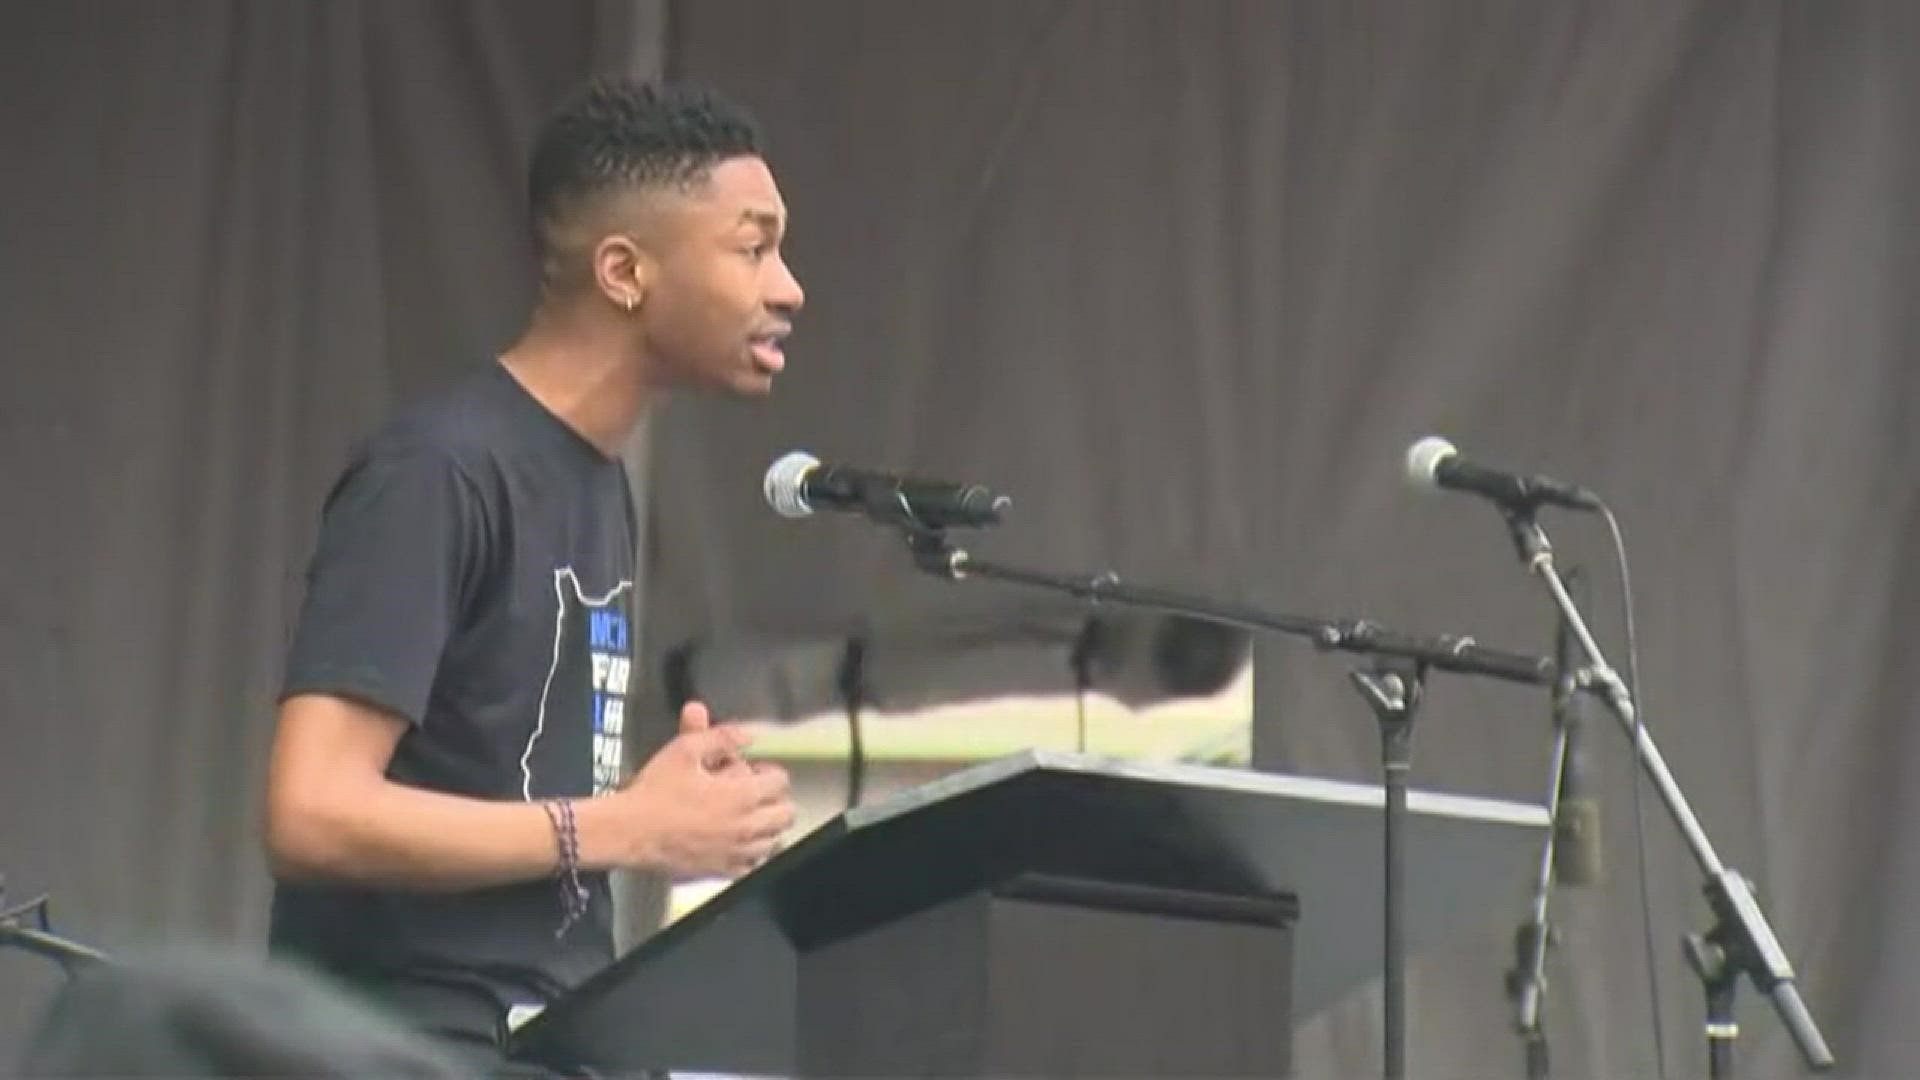 Student organizer Tyler White delivers a spoken word speech at March for Our Lives in Portland.